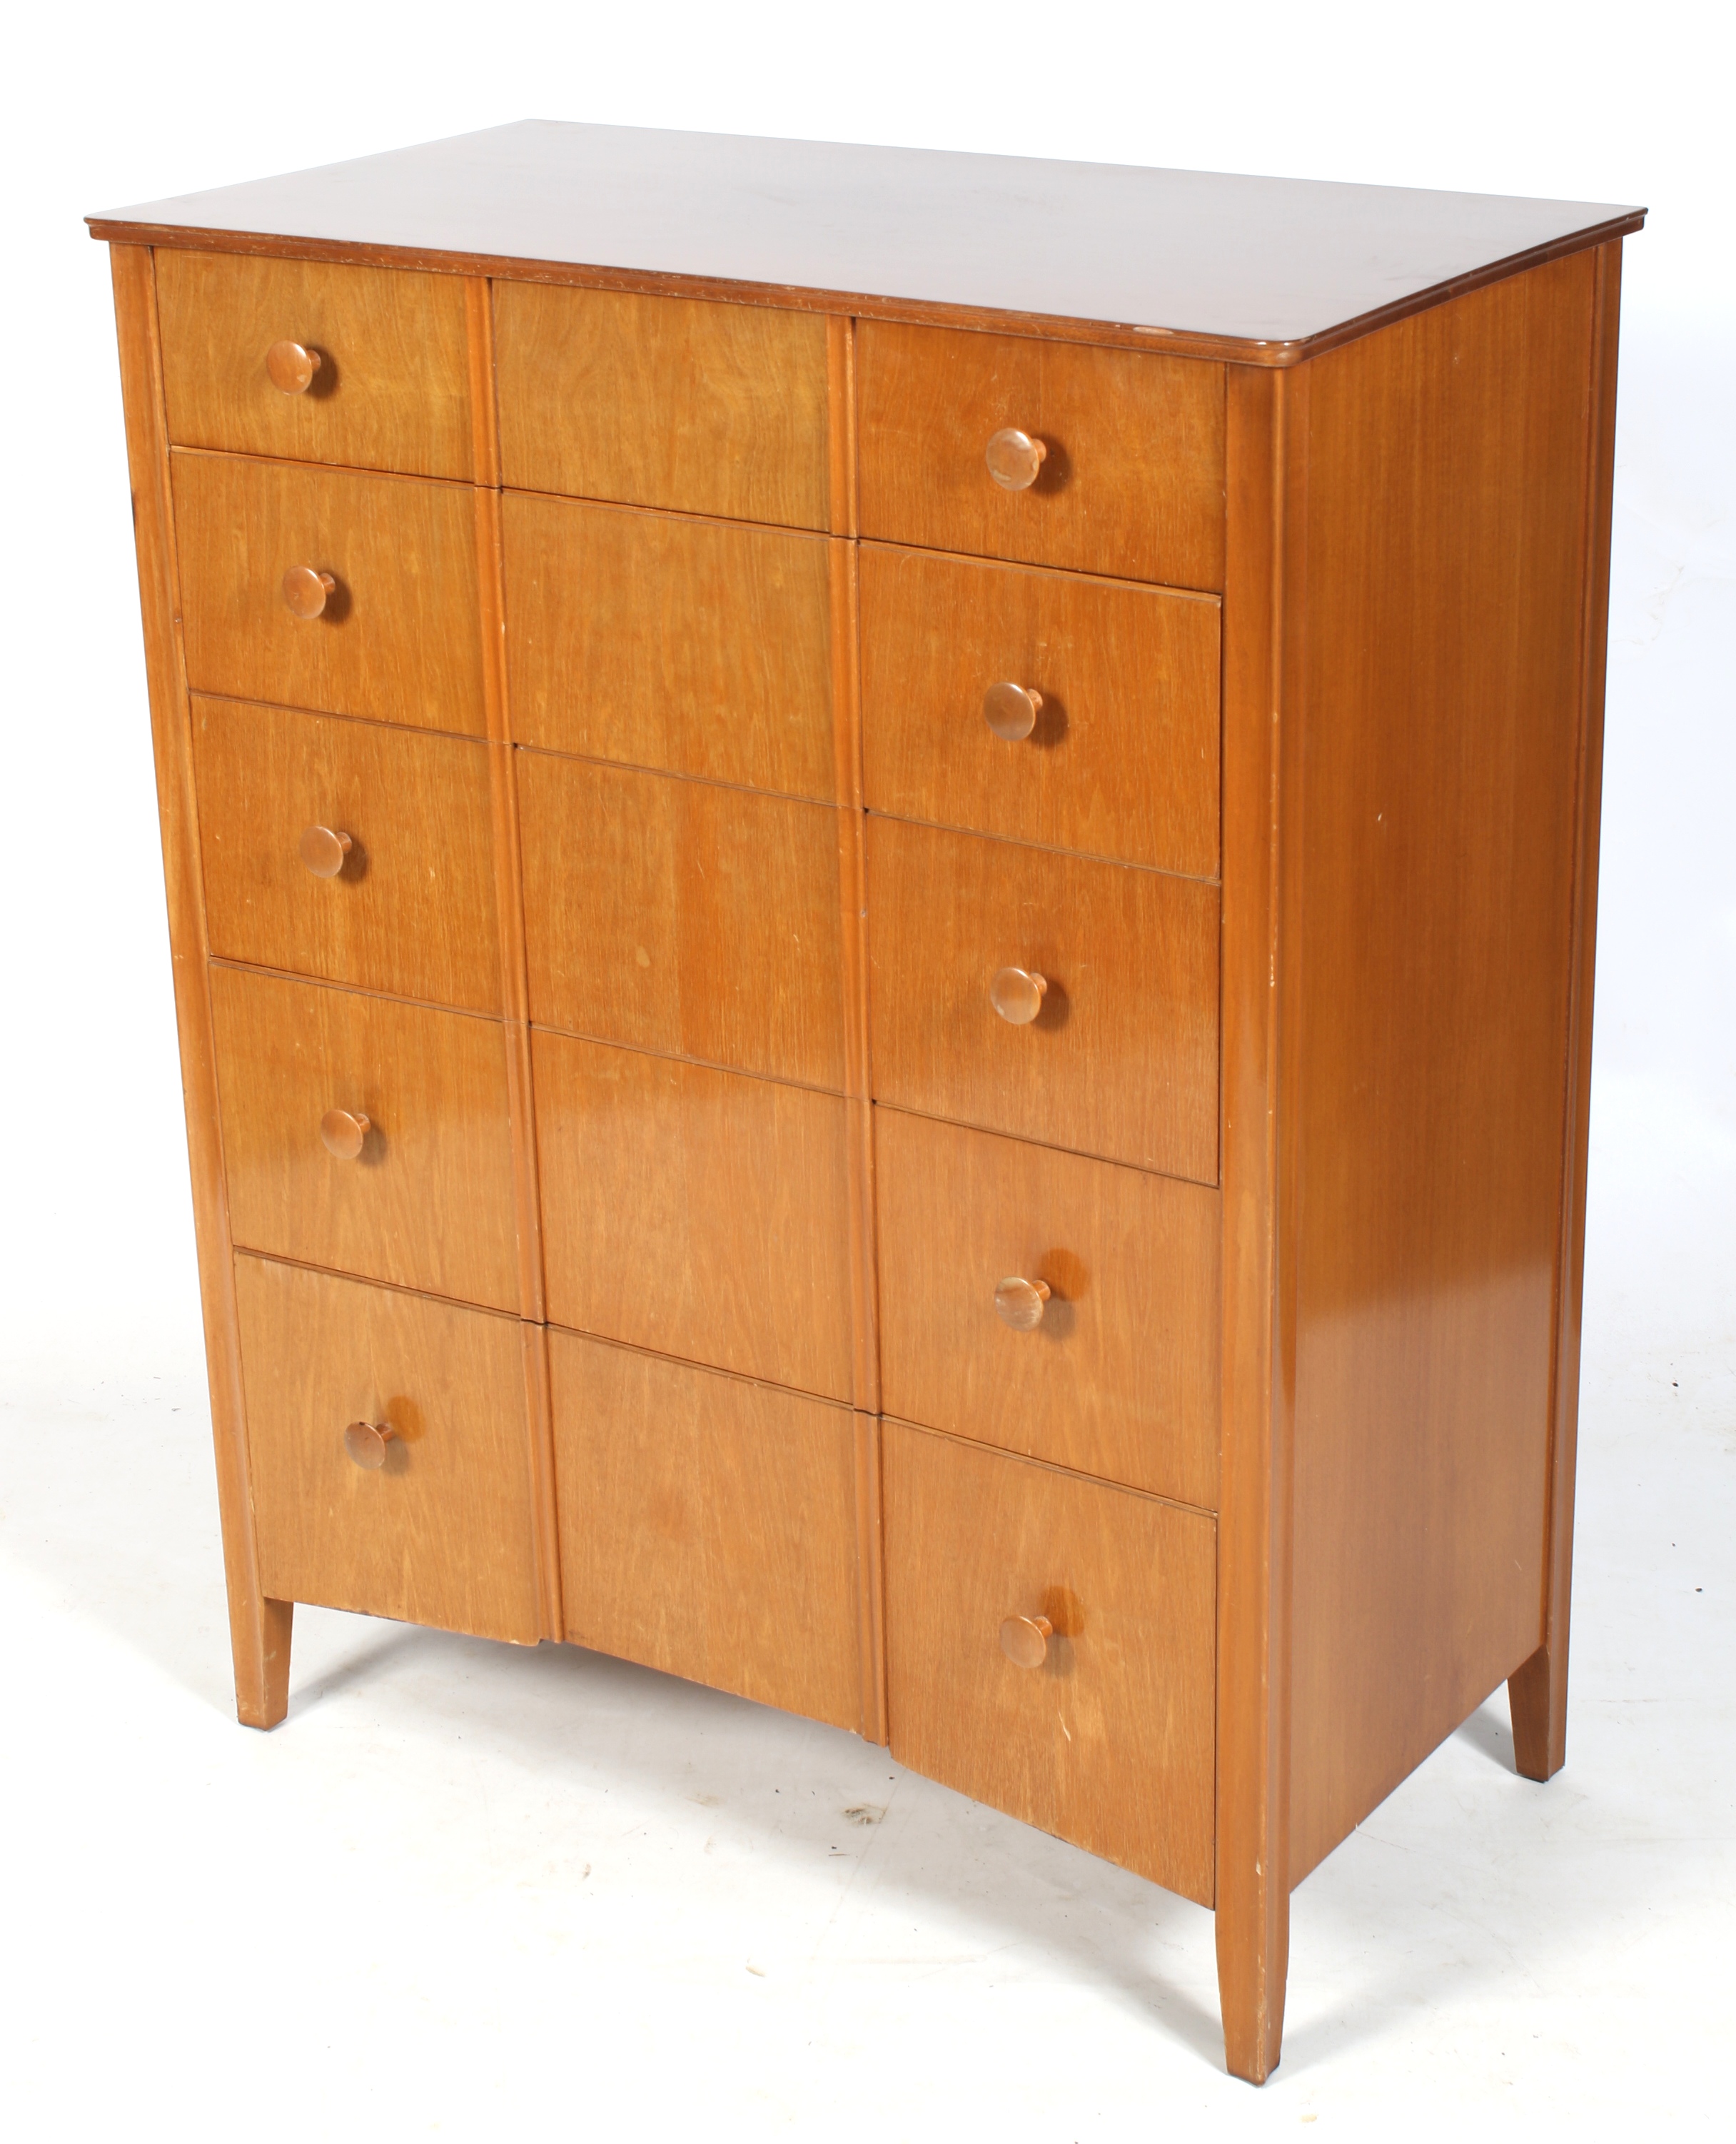 A mid-century chest of drawers from Heals.